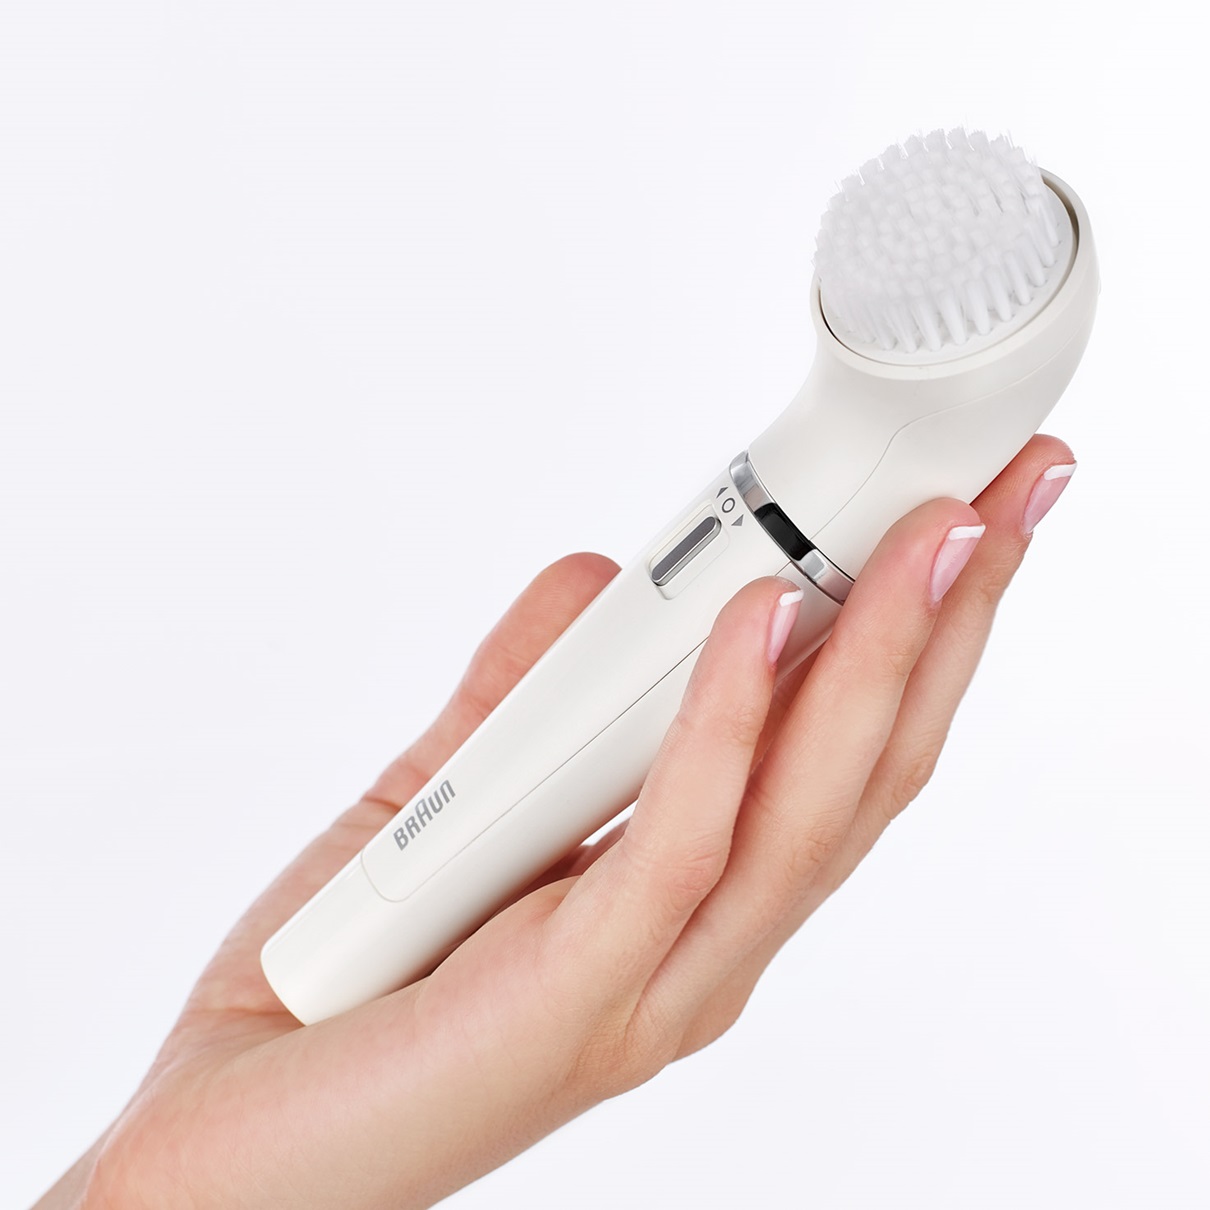 Braun Face 820 - facial epilator & facial cleansing brush with micro-oscillations - in hand